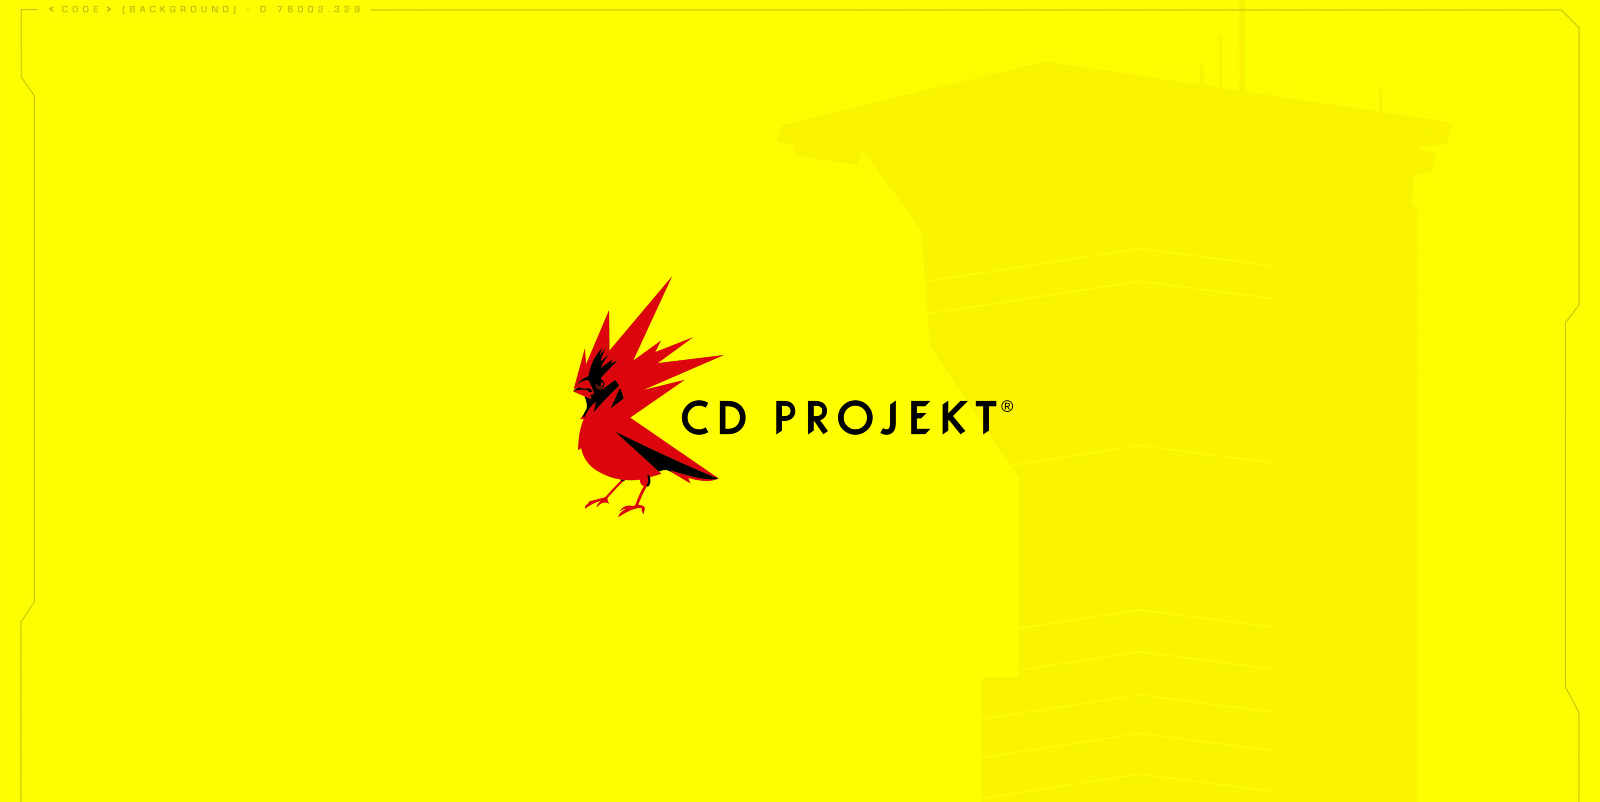 CD PROJEKT RED gaming studio hit by ransomware attack